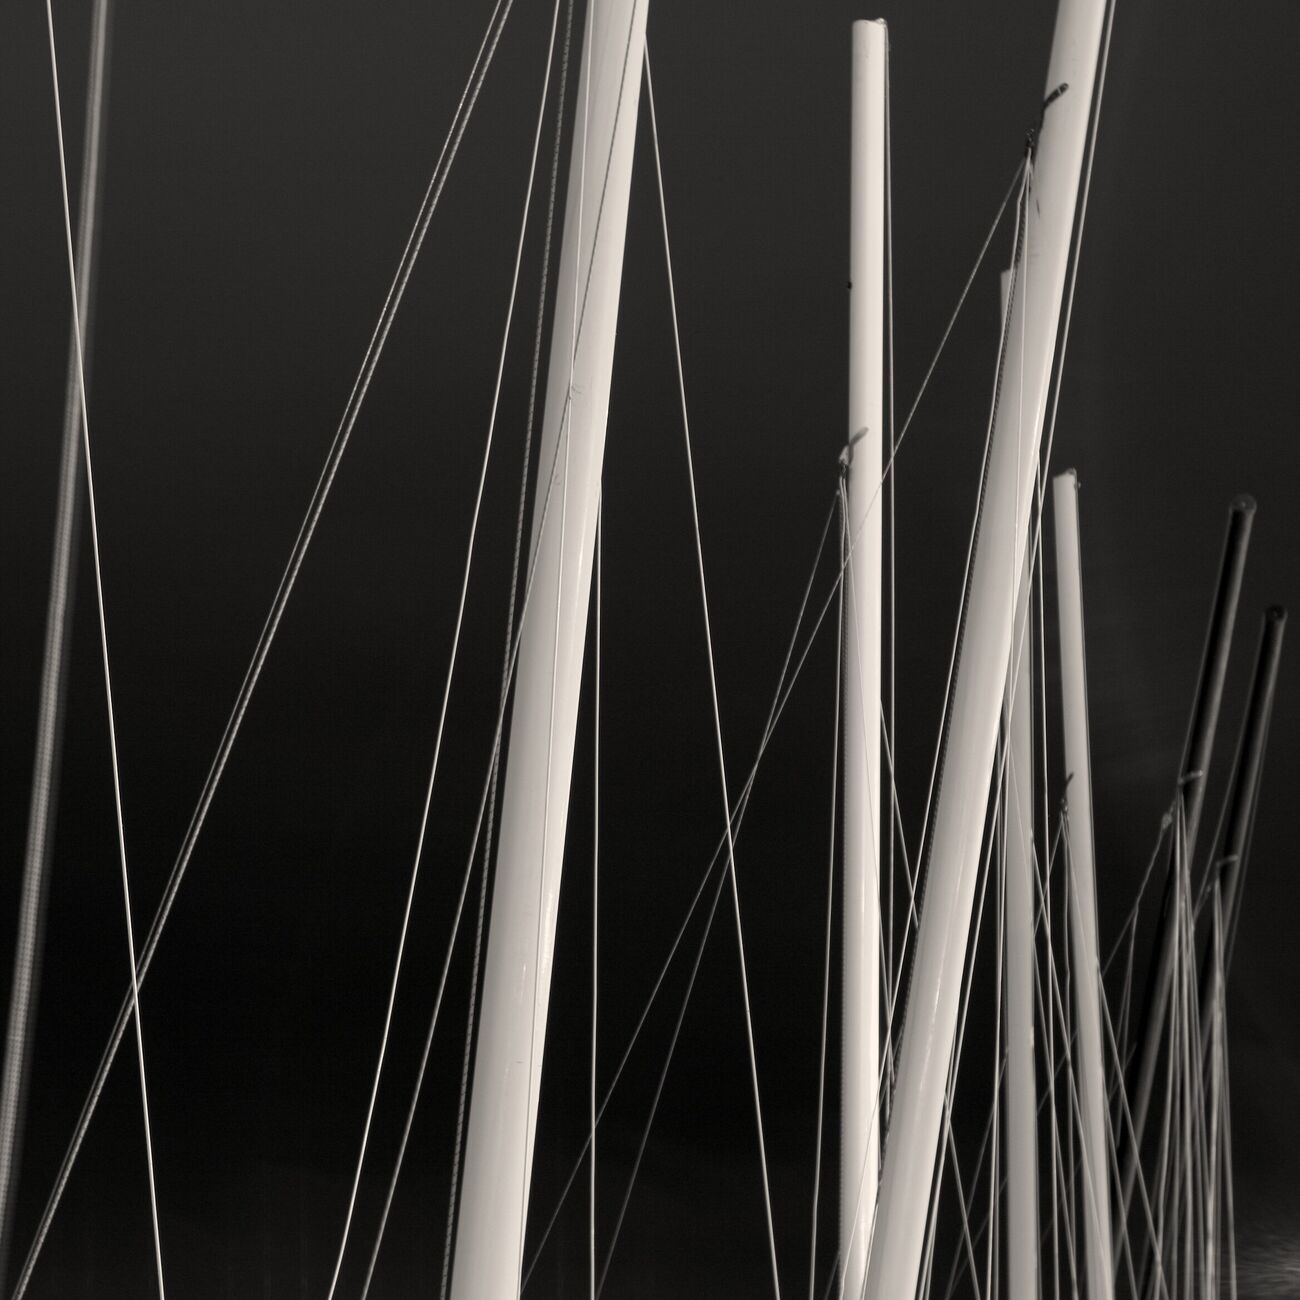 Get a 5.1 x 5.1 in, Waiting for the wind. Ref-666-19 - Denis Olivier Art Photography